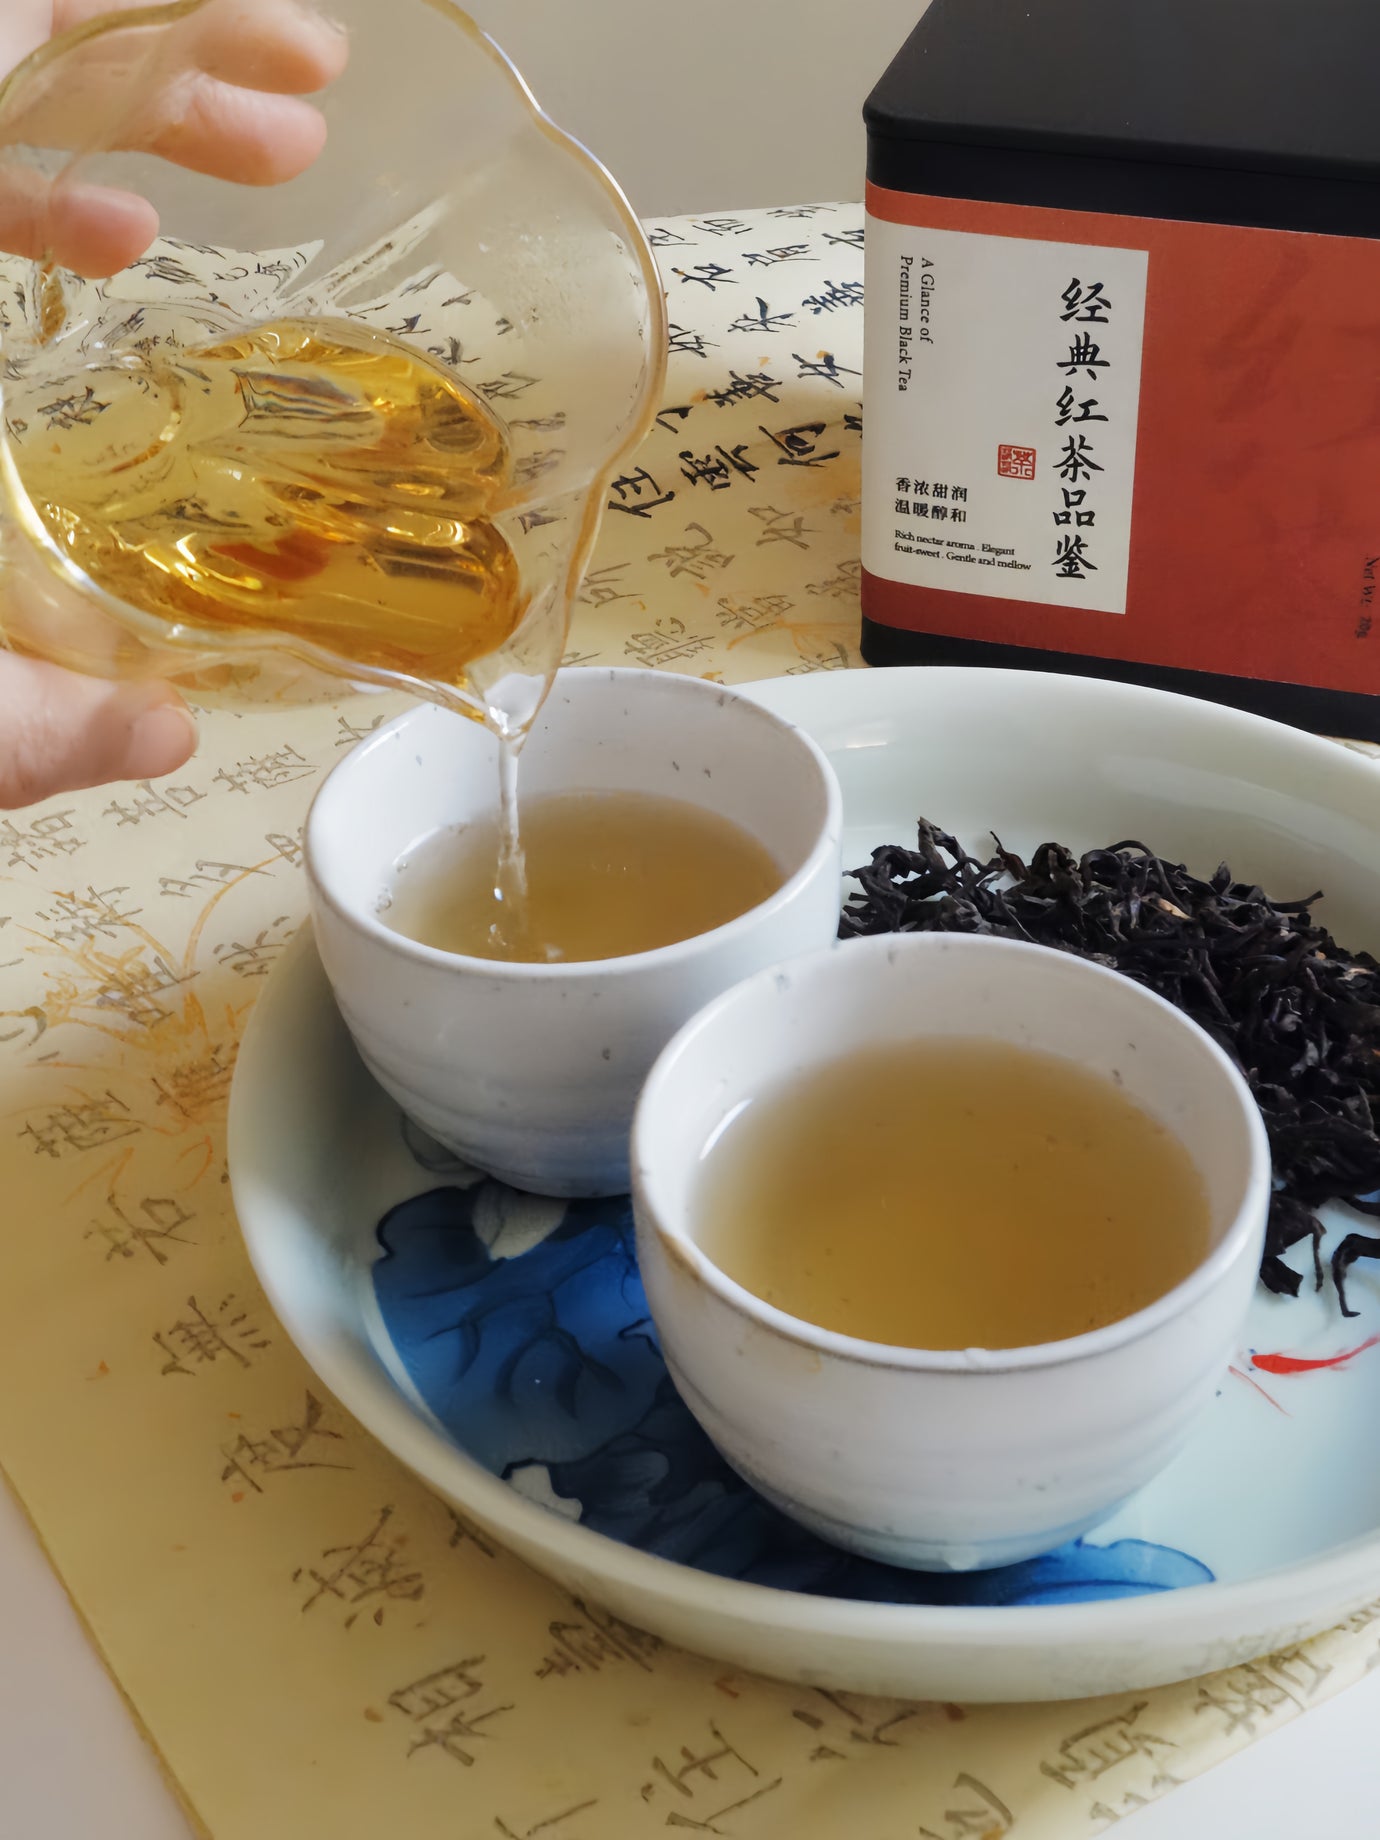 Tea Tasting: how to "smell the fragrance"?